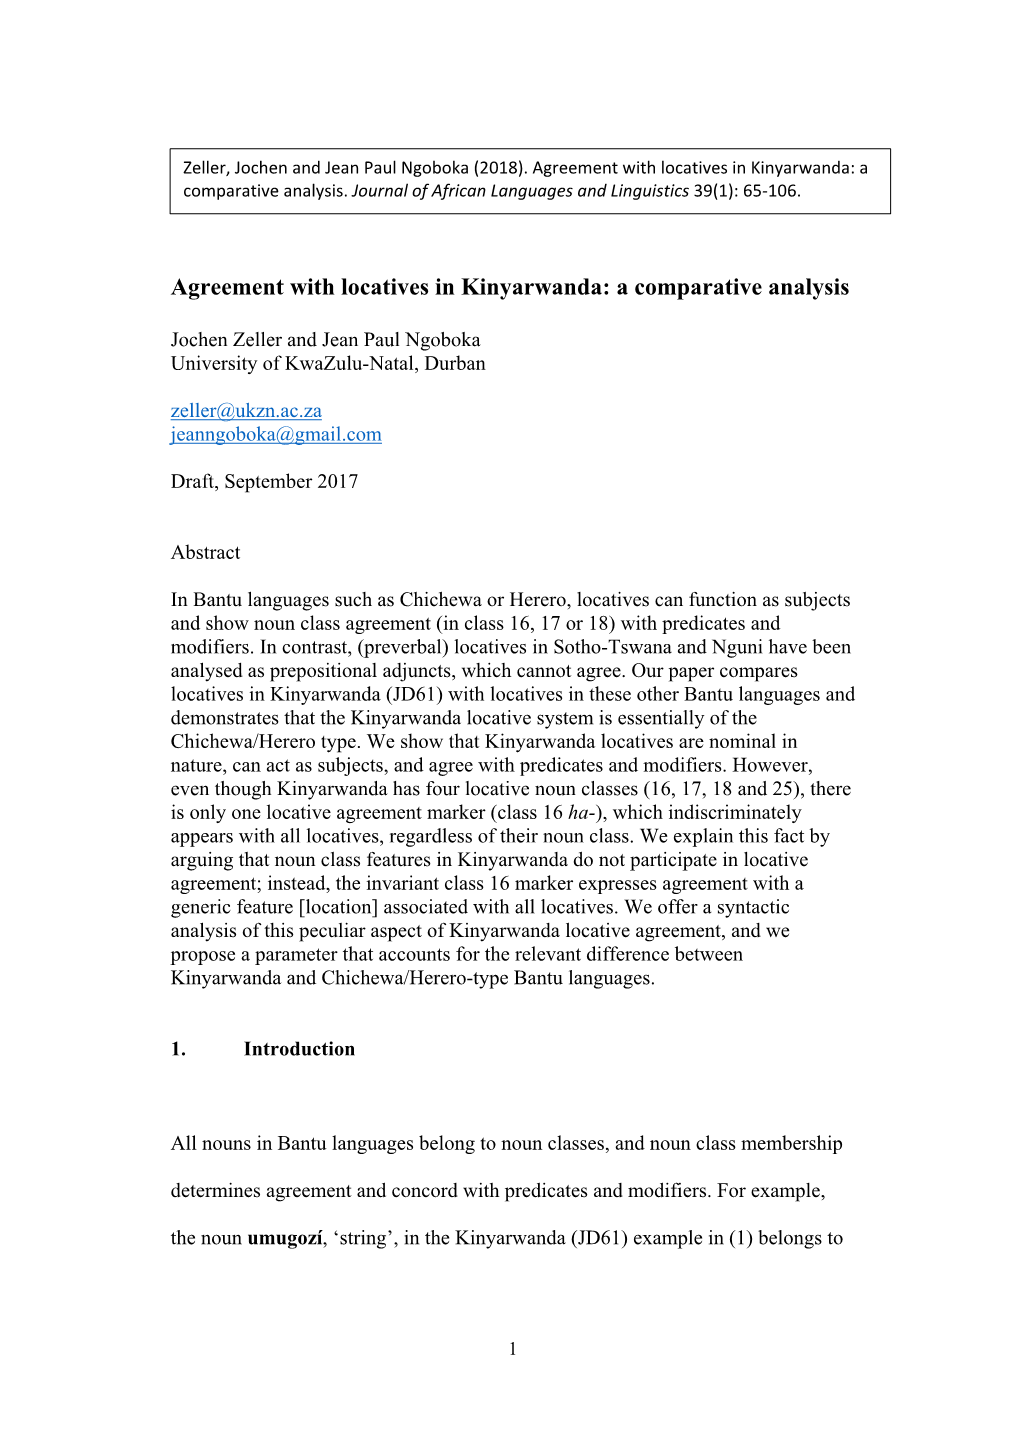 Agreement with Locatives in Kinyarwanda: a Comparative Analysis